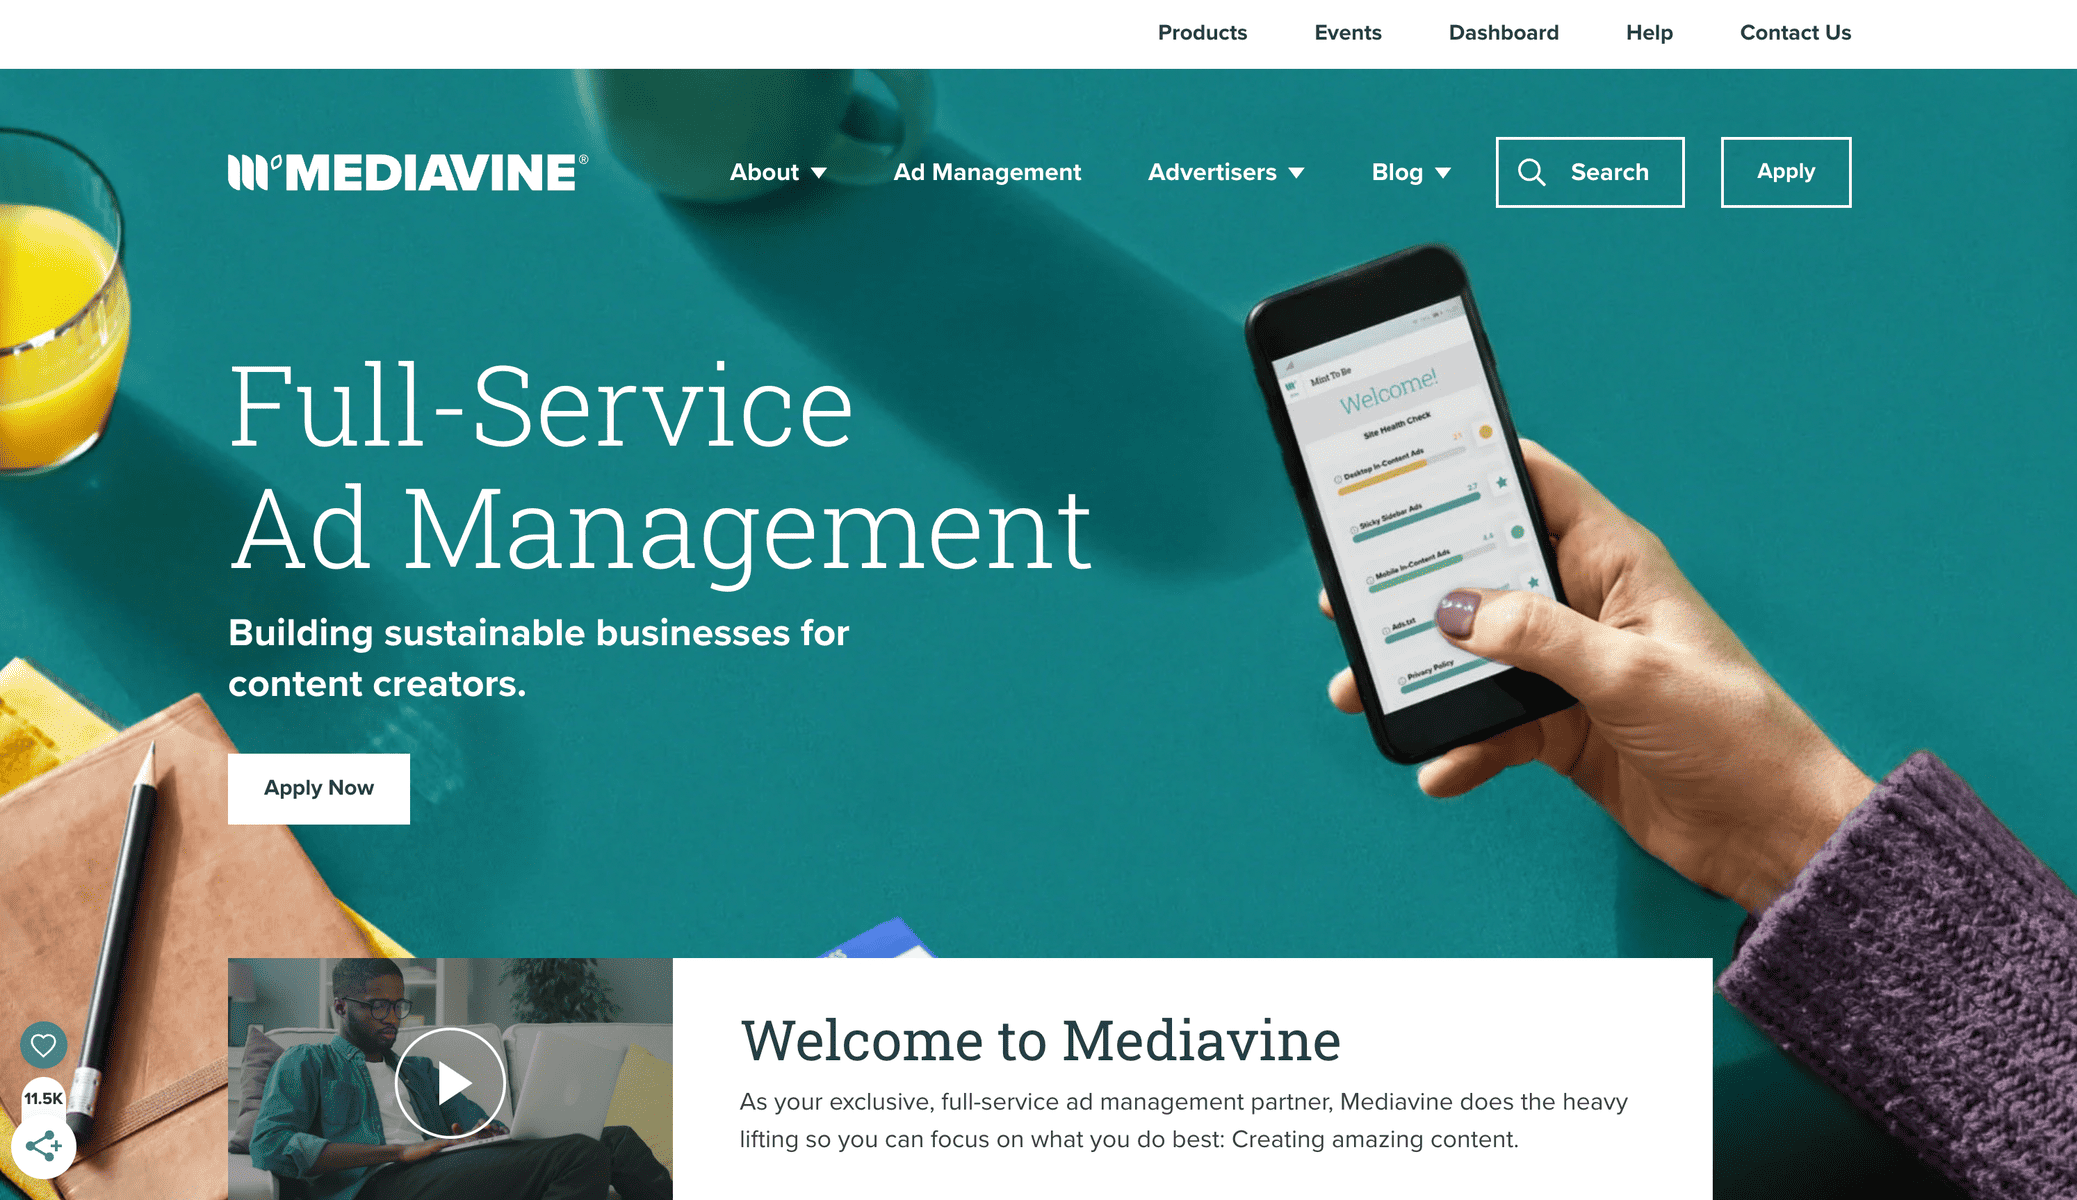 Mediavine a full service ad management for content creators and bloggers.